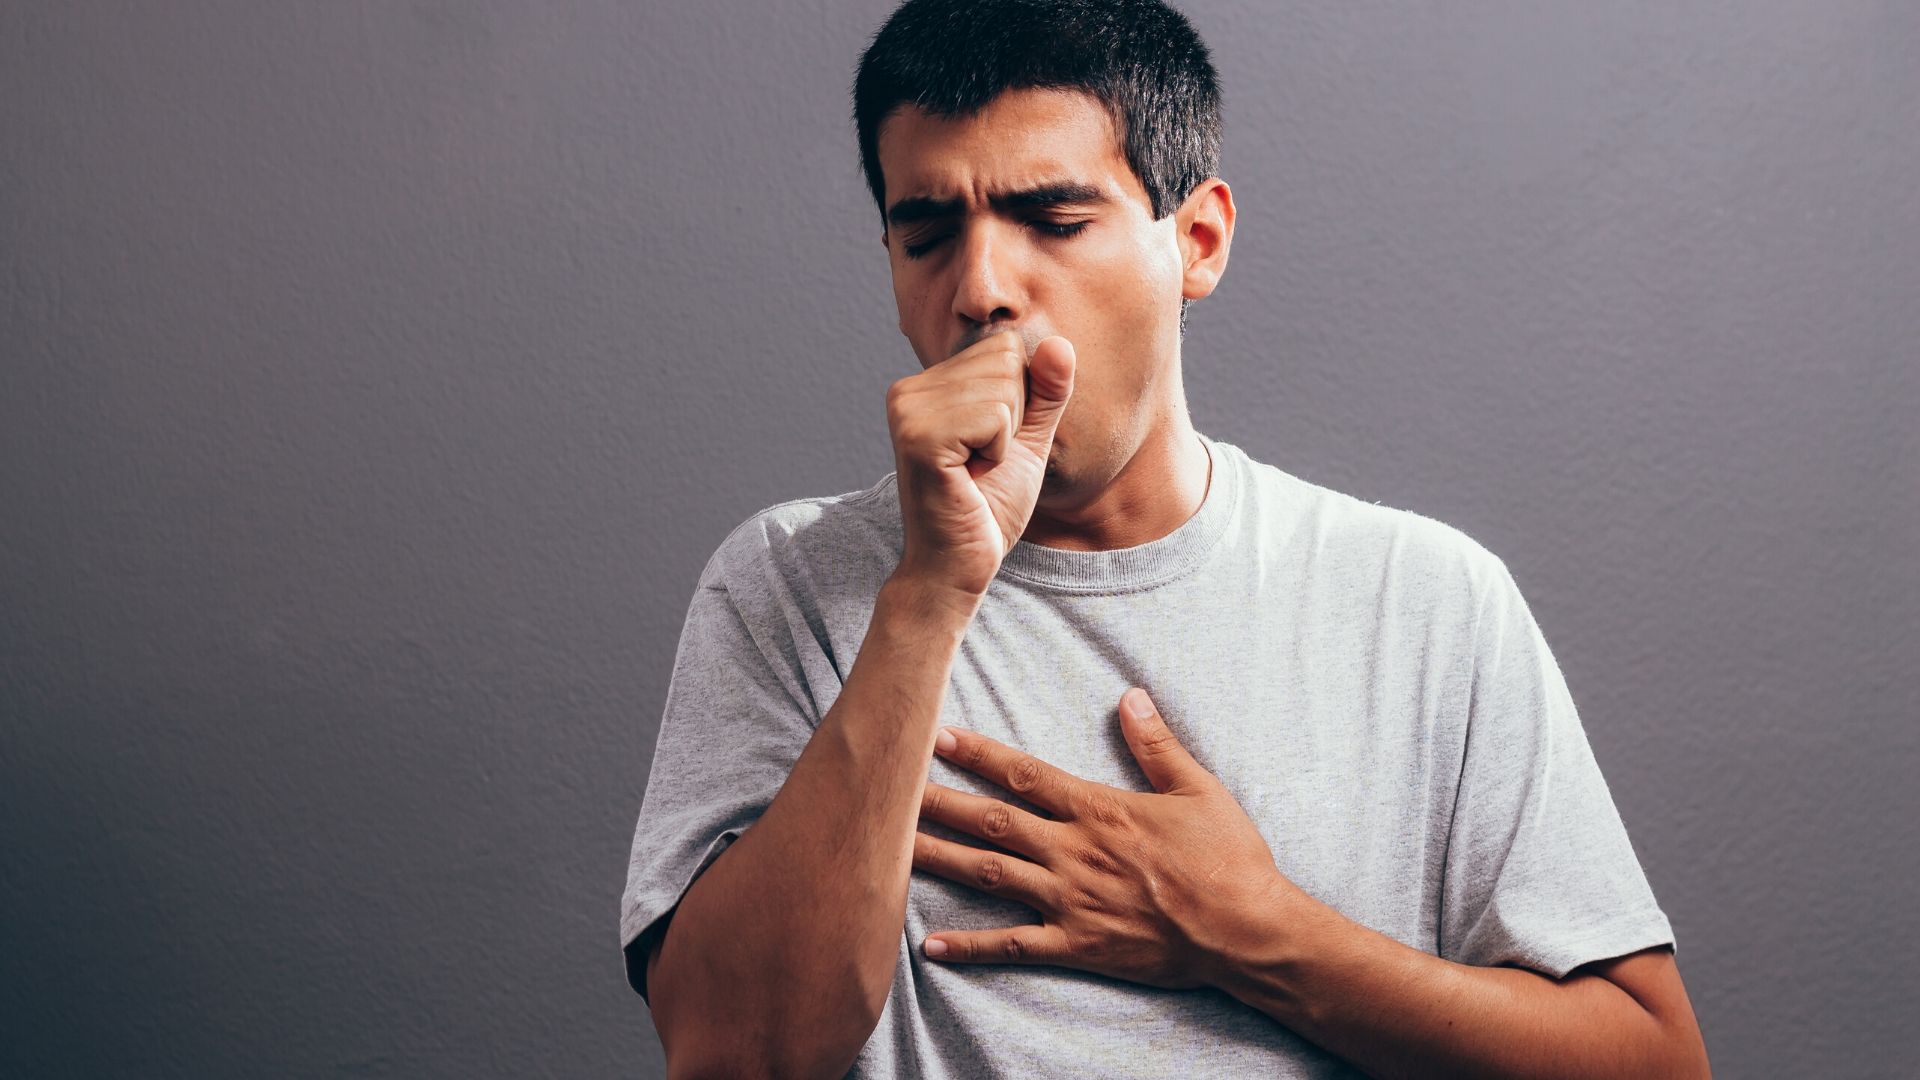 How Do You Diagnose and Treat Chronic Cough?